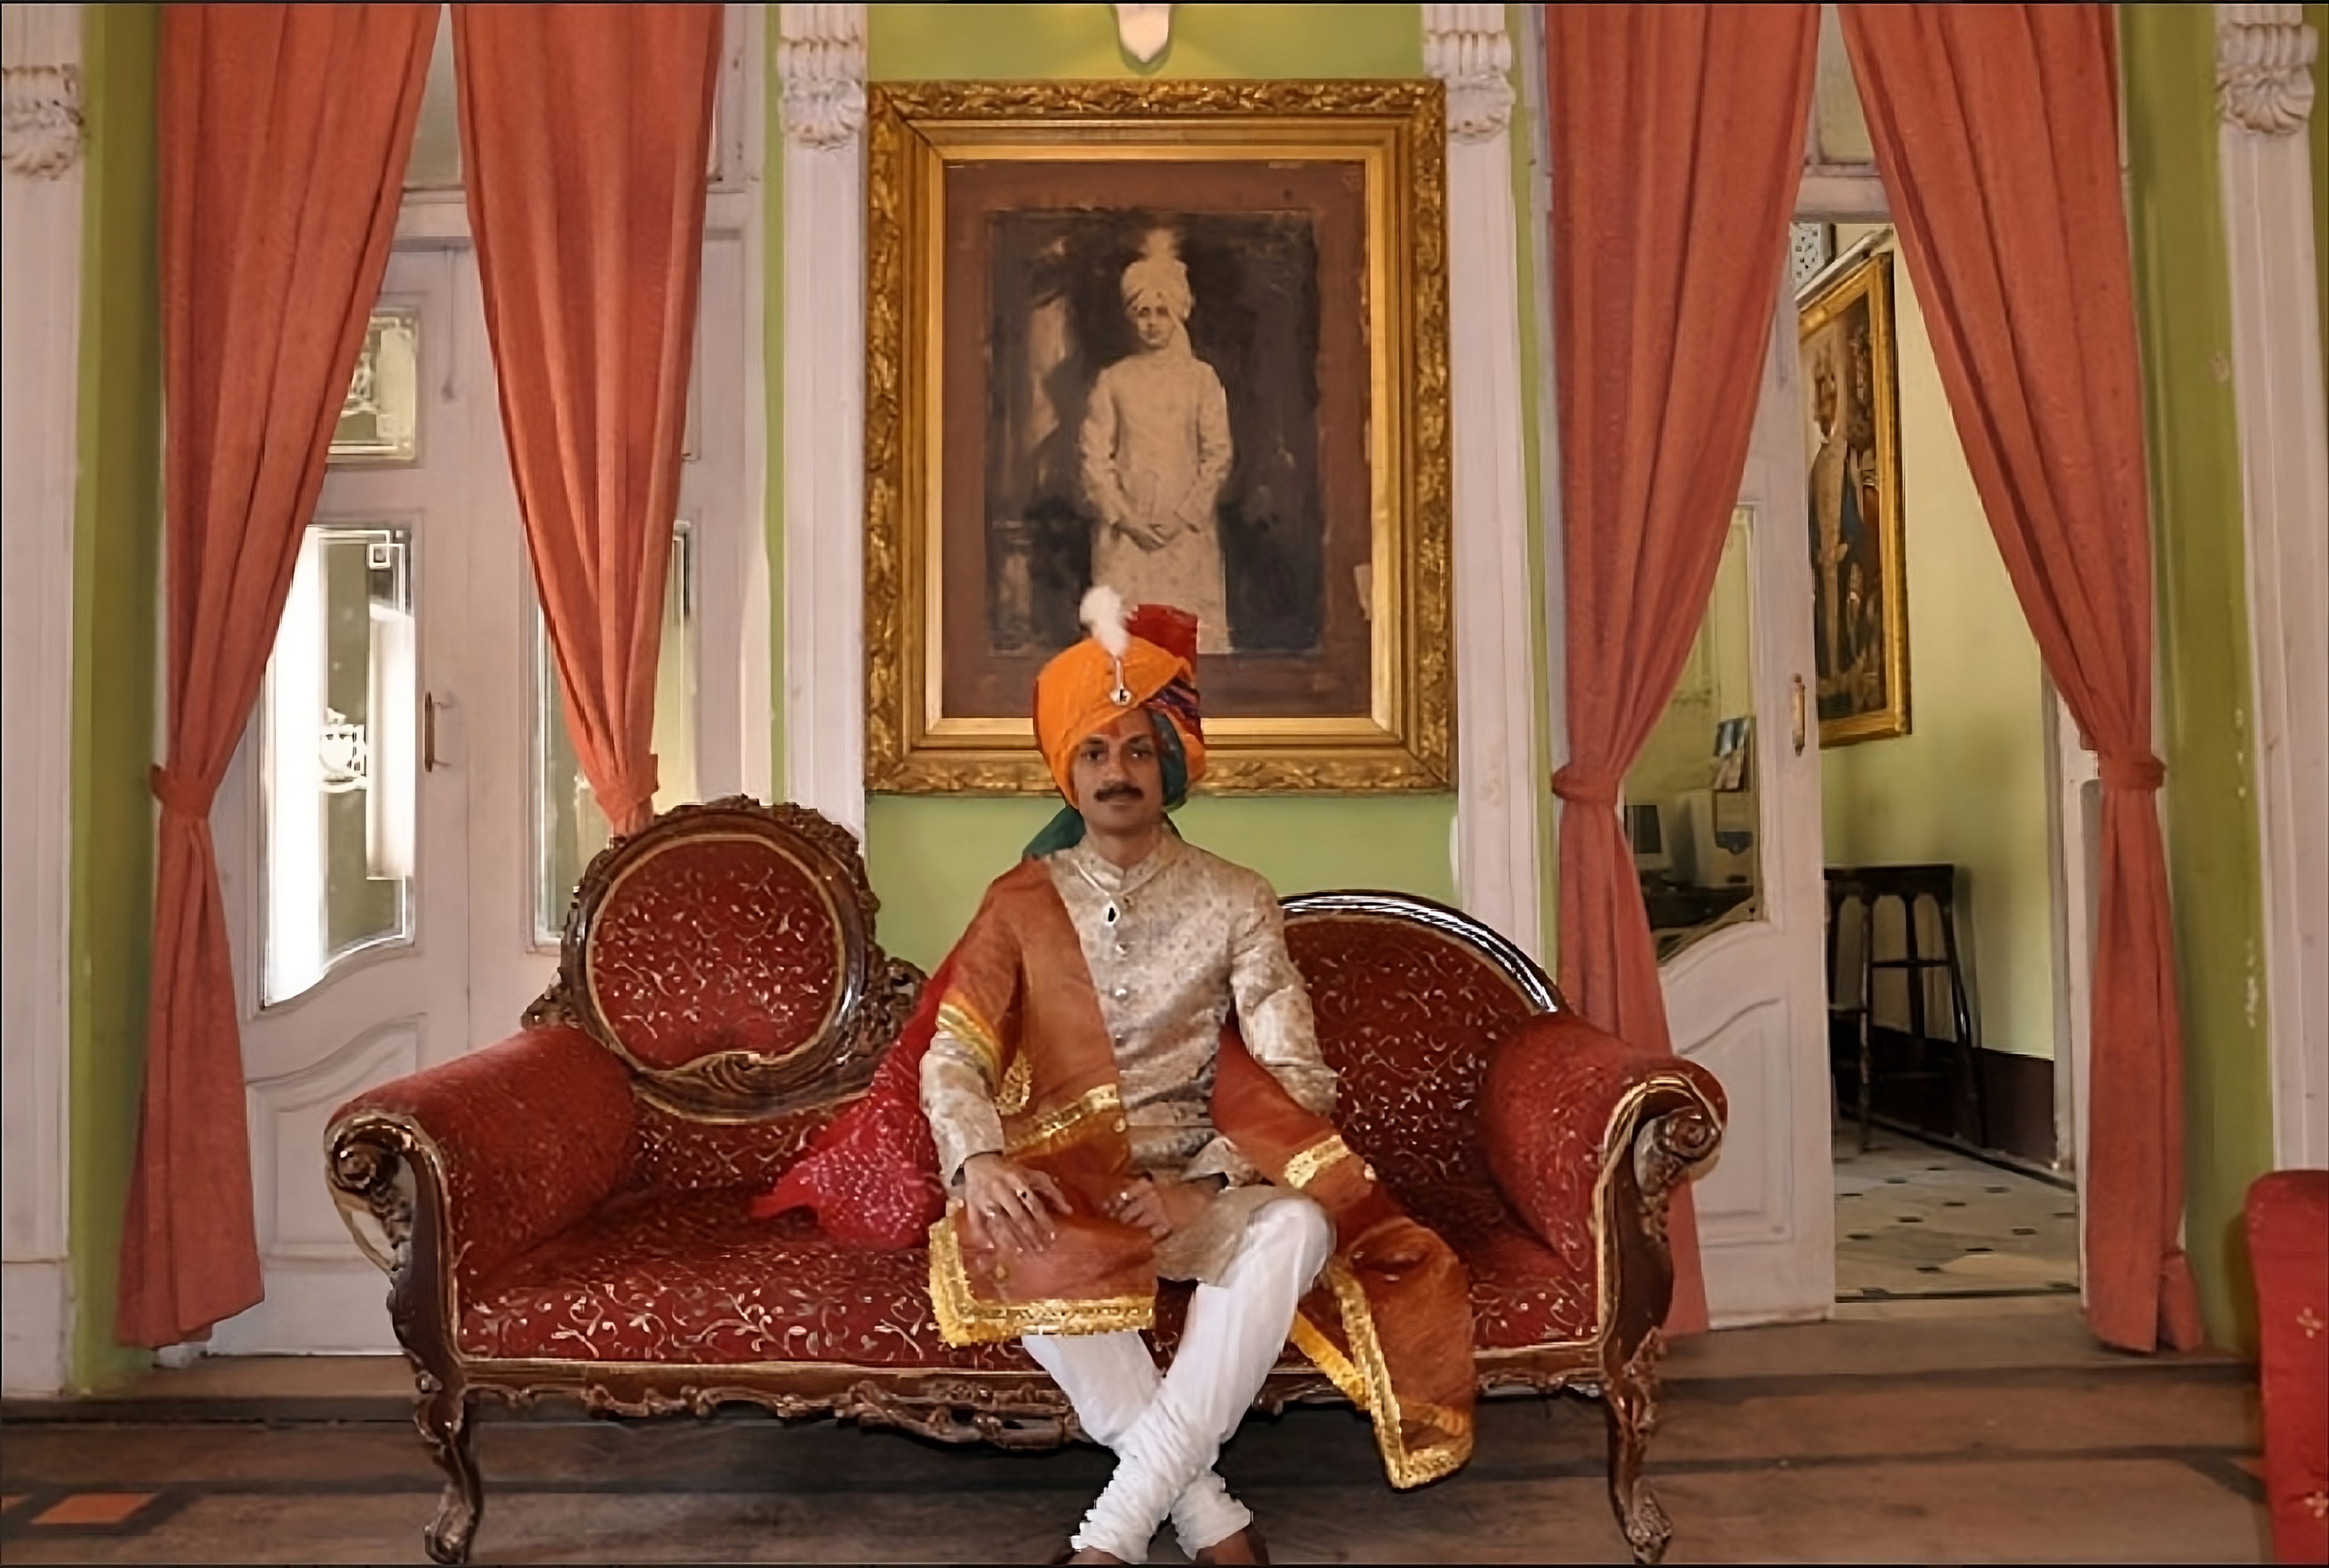 Prince Manvendra Singh Gohil, India’s first openly gay prince, is the founder of the Lakysha Trust, an LGBTQ charity based in Gujarat state. Photo: Handout via Thomson Reuters Foundation